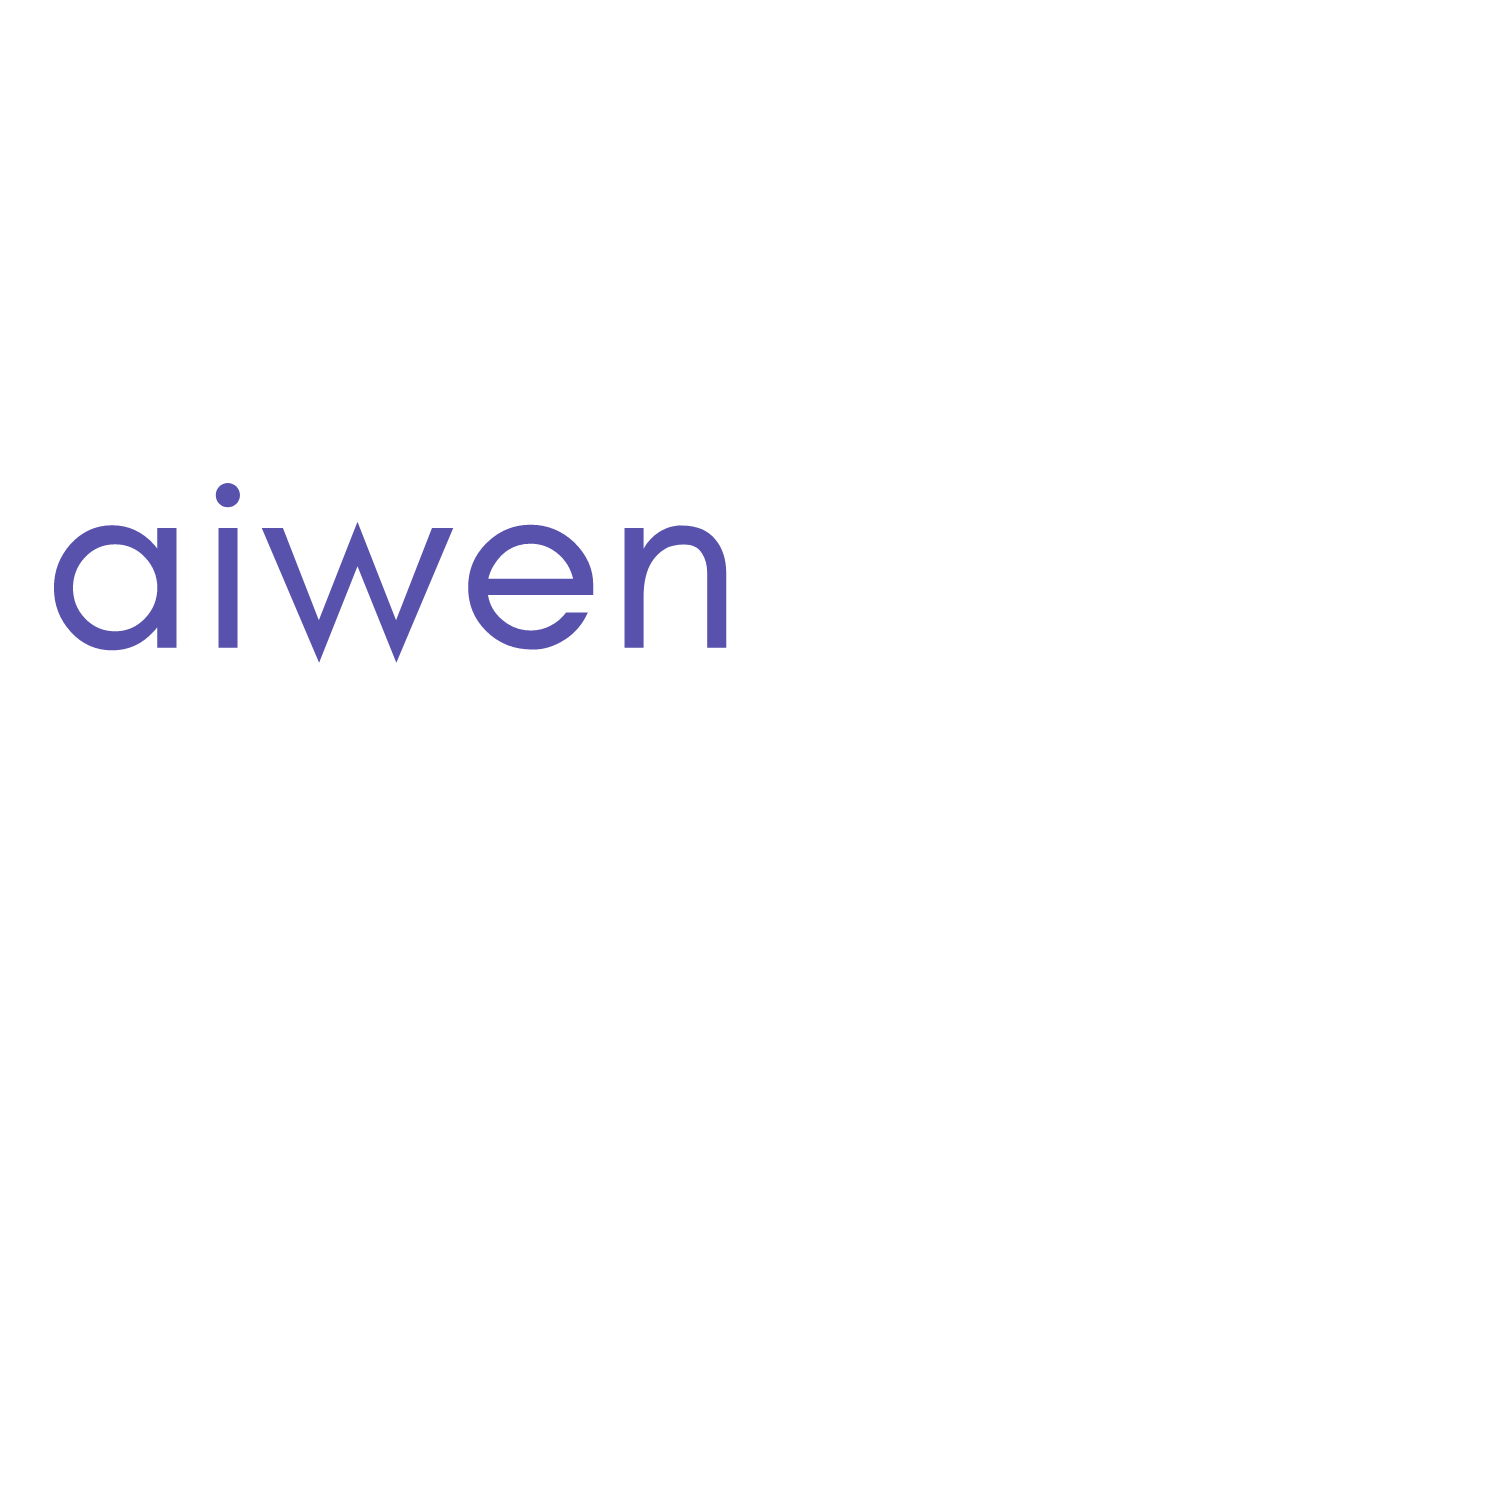 Aiwen Psychotherapy Services